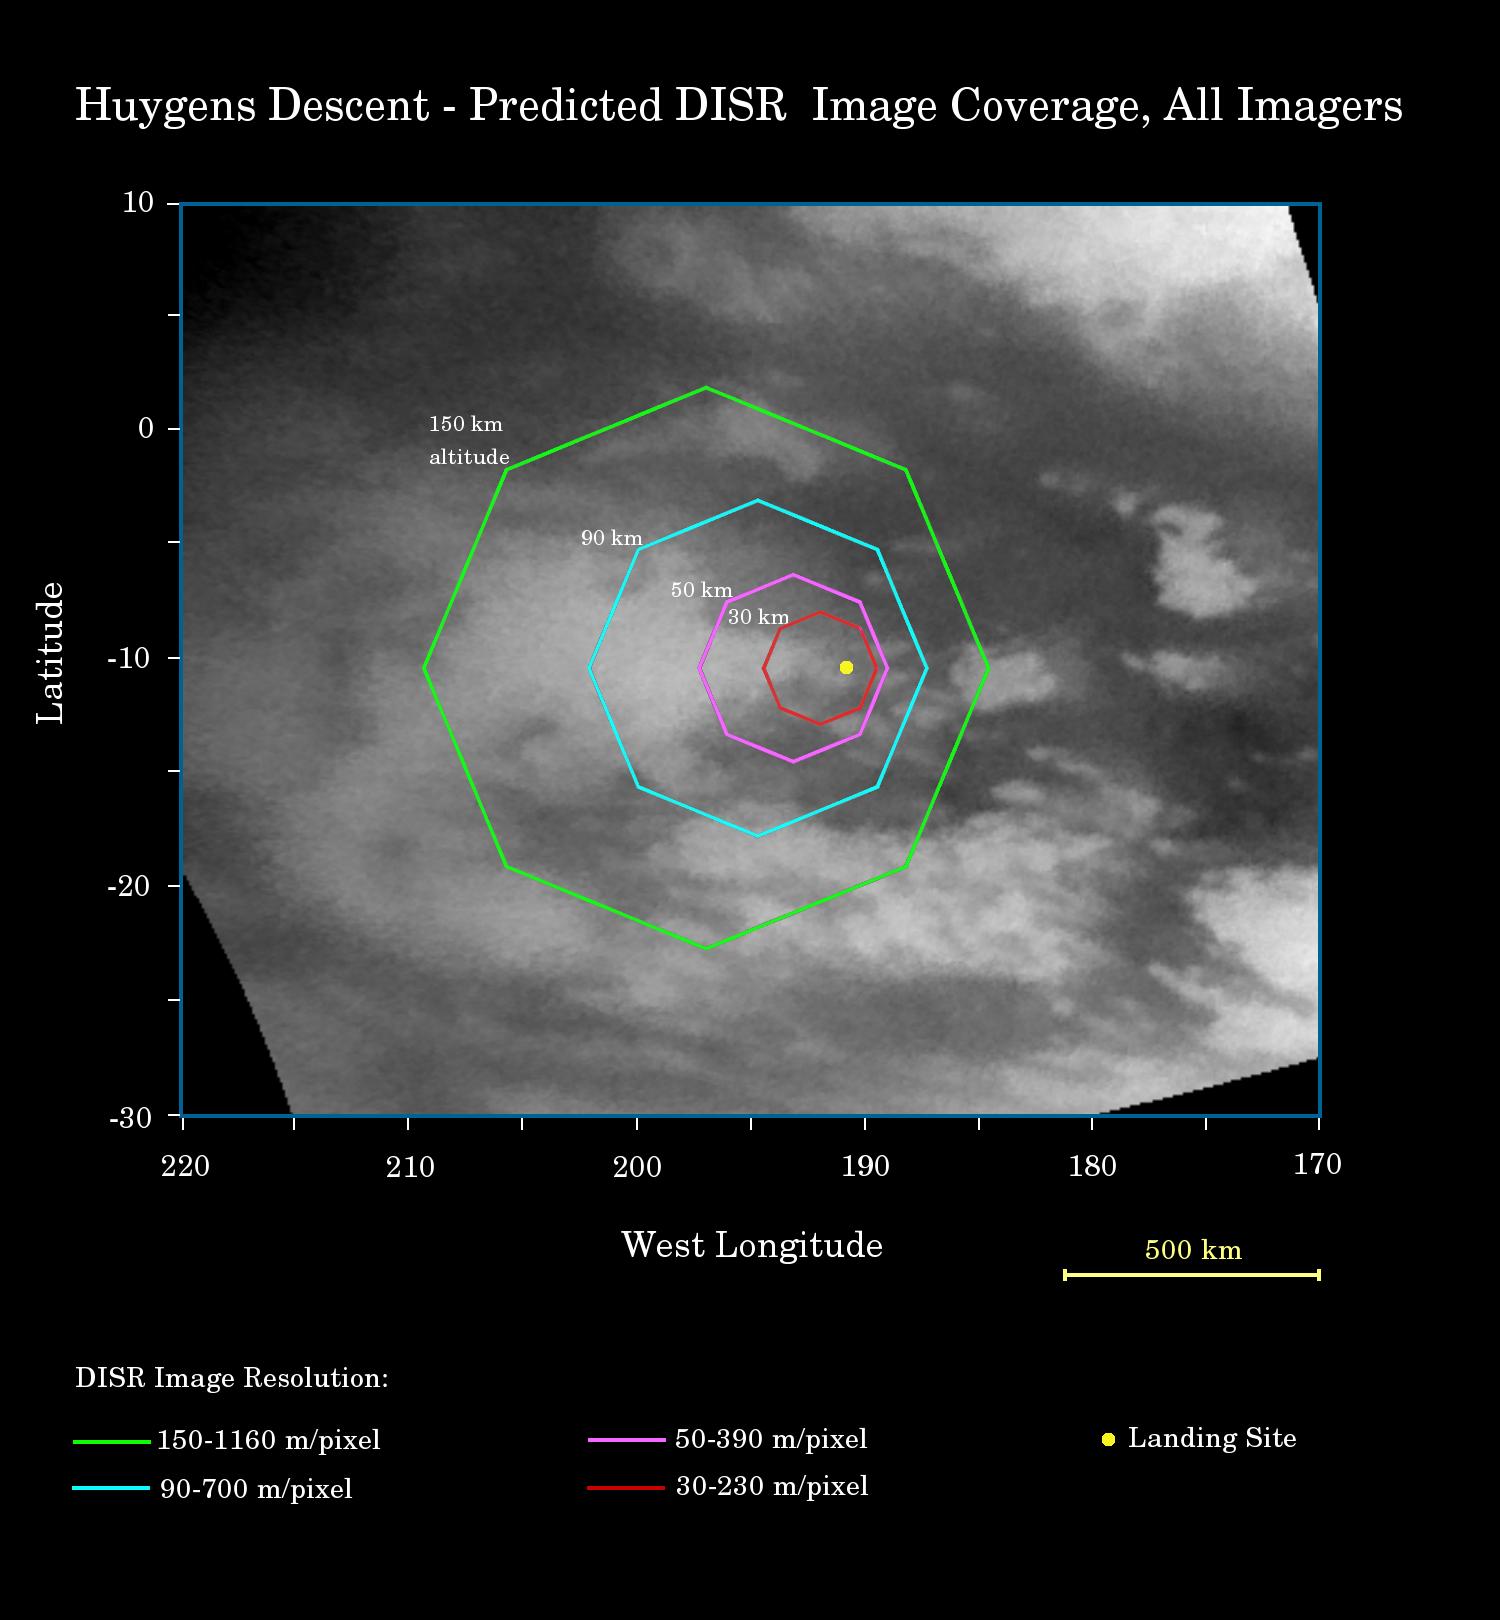 Black and white image detailing imaging coverage areas planned for the Huygens probe descent.